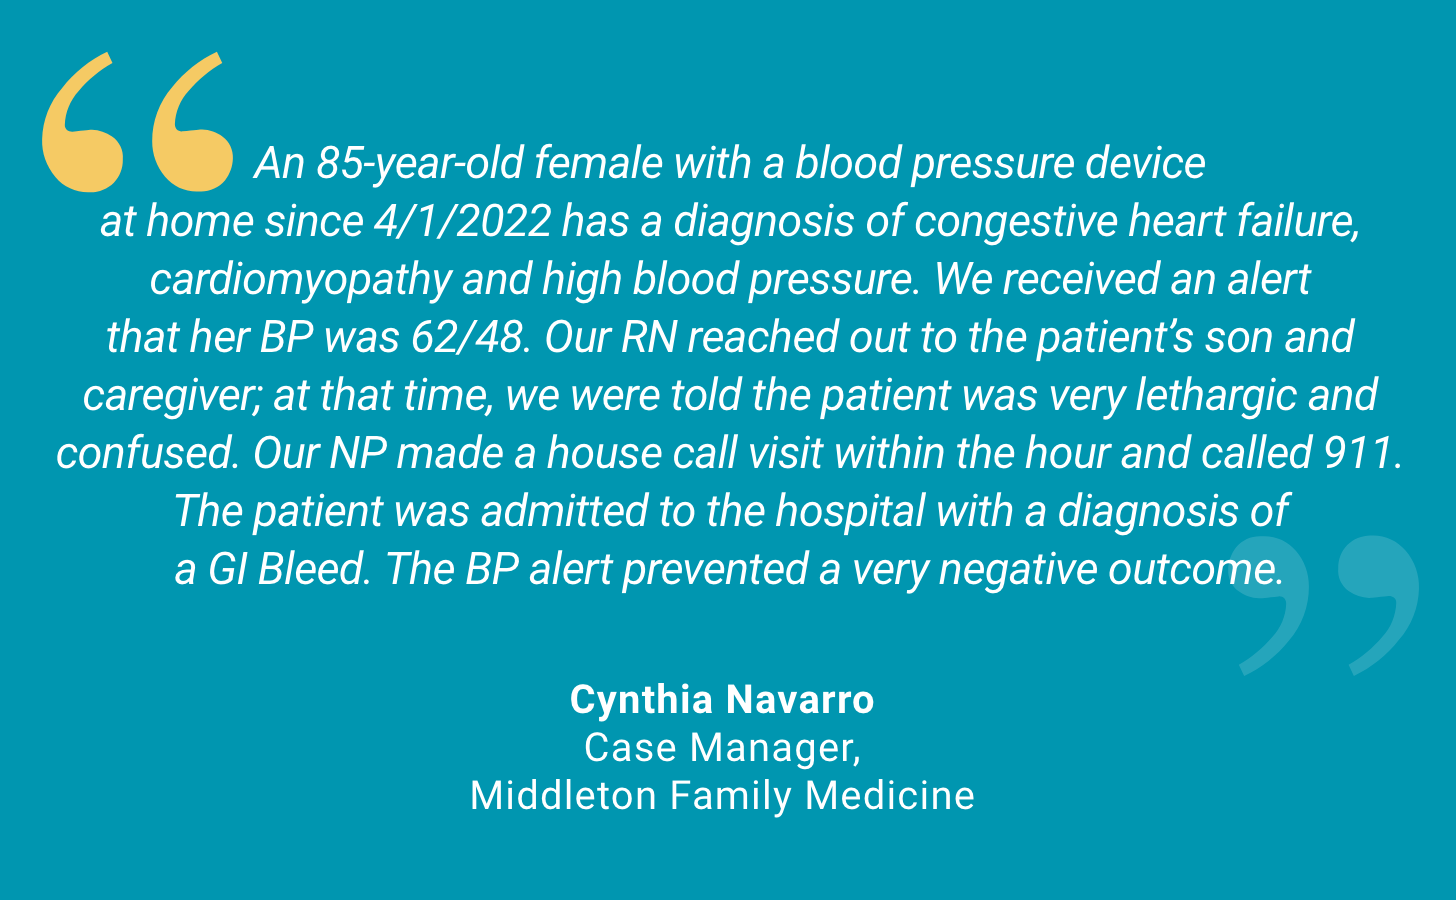 An 85-year-old female with a blood pressure device at home since 4/1/2022 has a diagnosis of congestive heart failure, cardiomyopathy and high blood pressure. We received an alert that her BP was 62/48. Our RN reached out to the patient's son and caregiver; at that time, we were told the patient was very lethargic and confused. Our NP made a house call visit within the hour and called 911. The patient was admitted to the hospital with a diagnosis of a GI Bleed. The BP alert prevented a very negative outcome